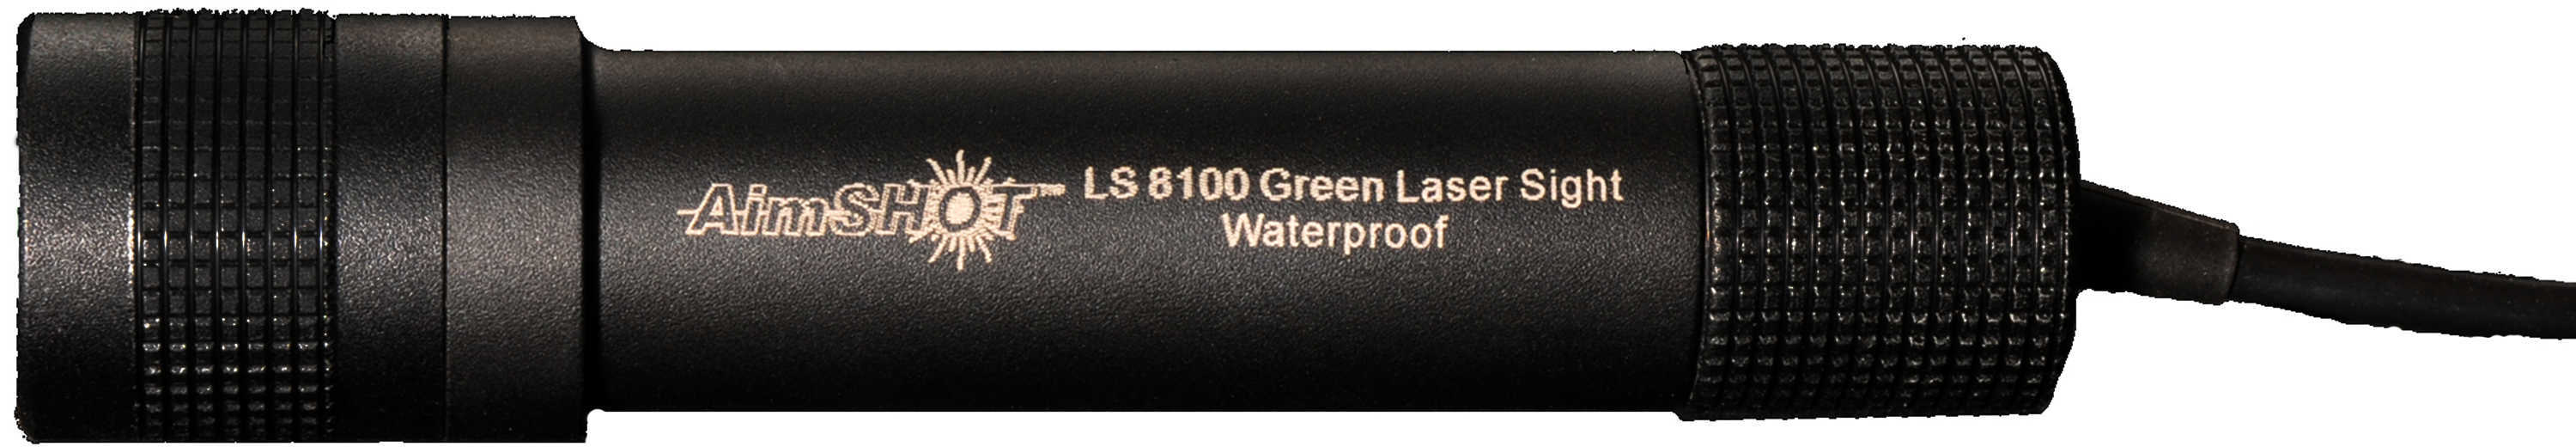 Aimshot Ls8100 5Mw Green Laser Rile Sight Without Mount